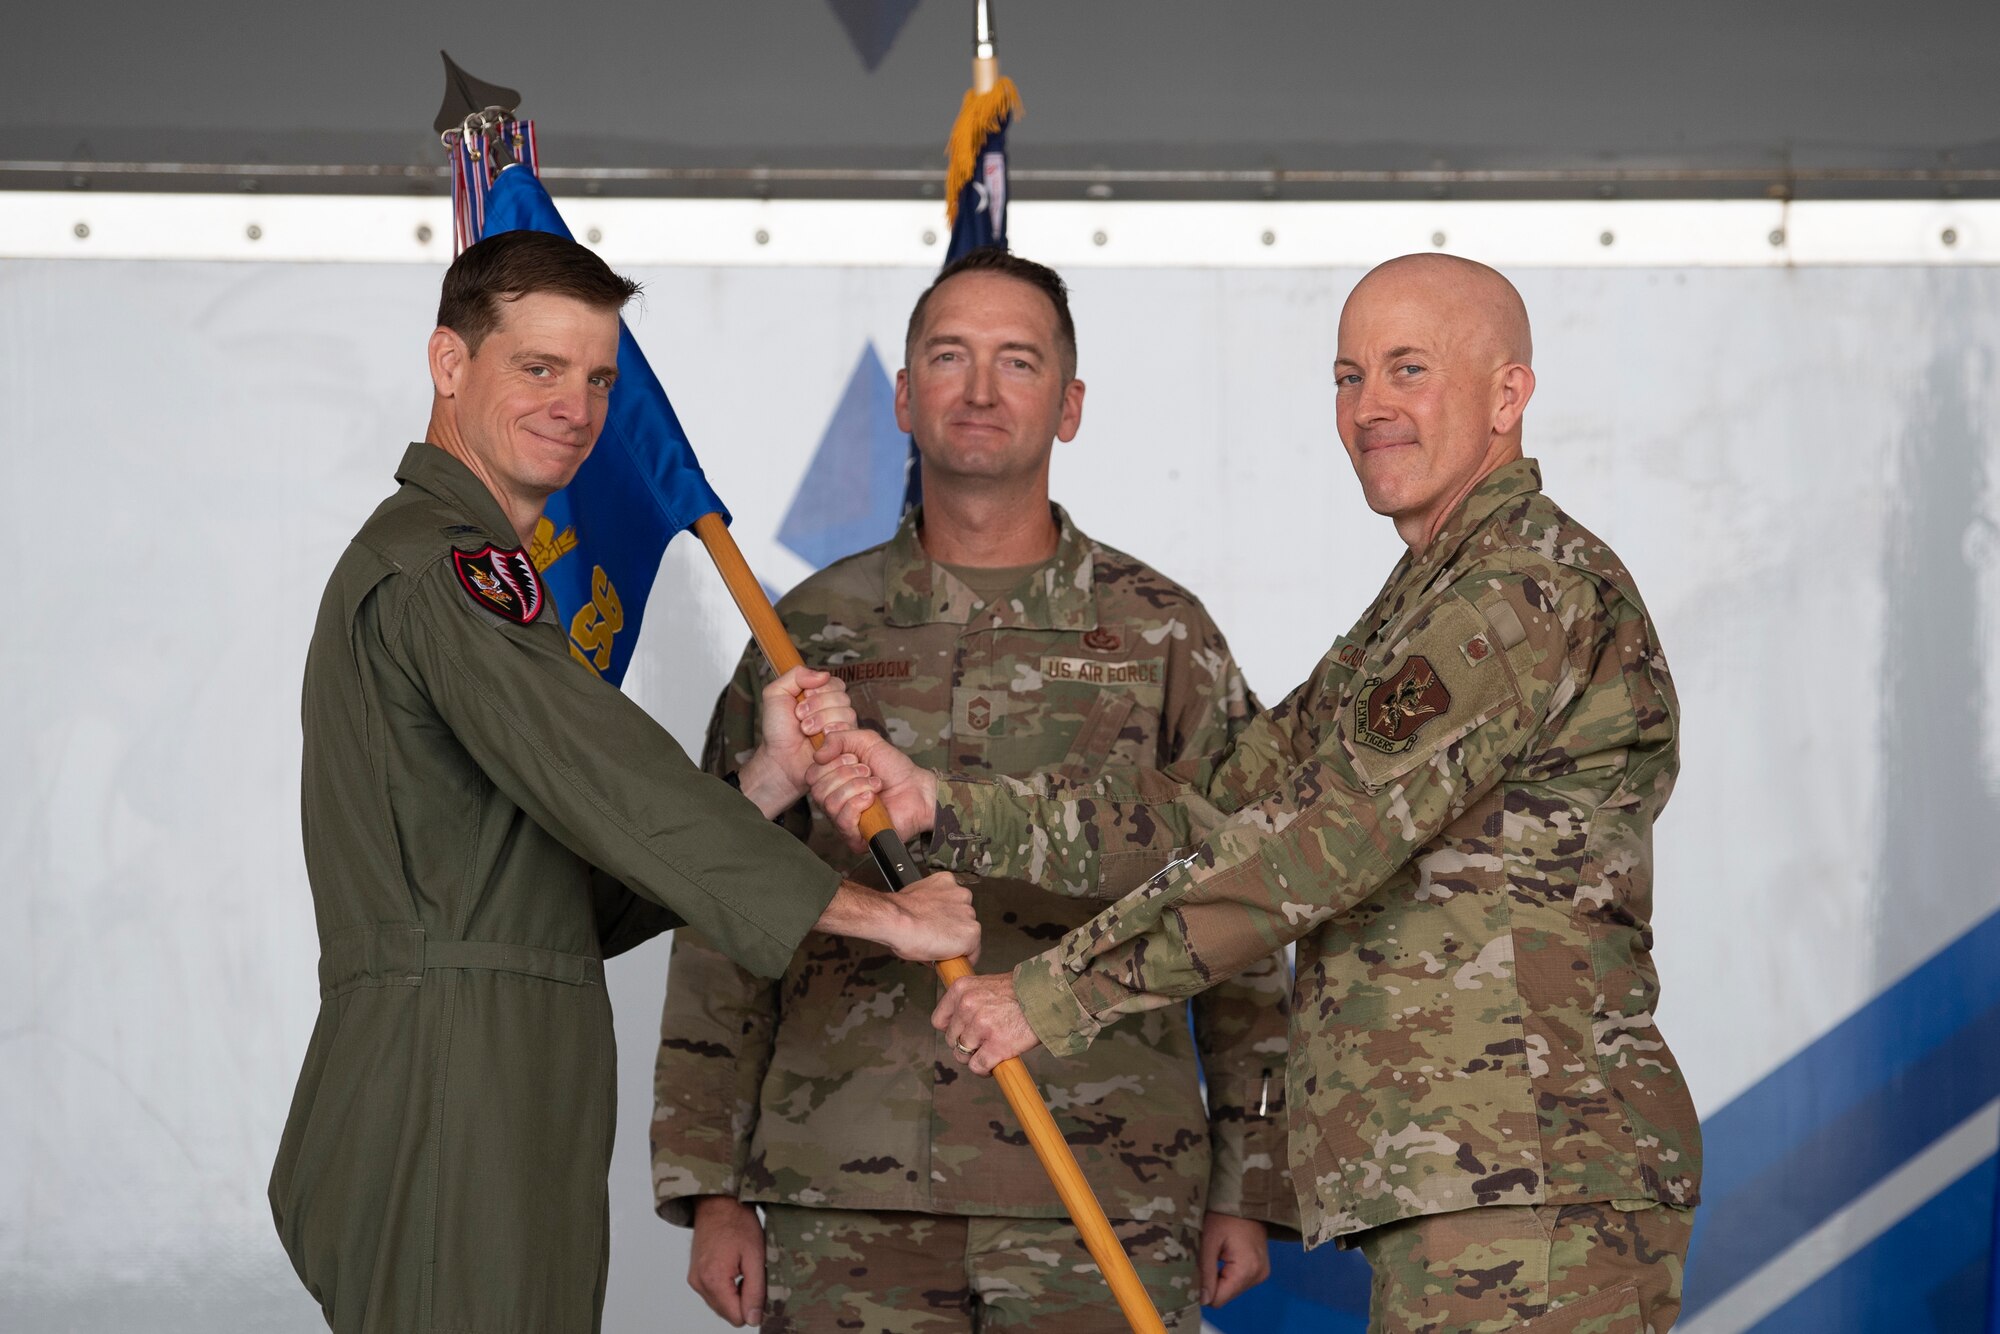 A photo of three men standing on a stage and "passing" a guidon from one to another.